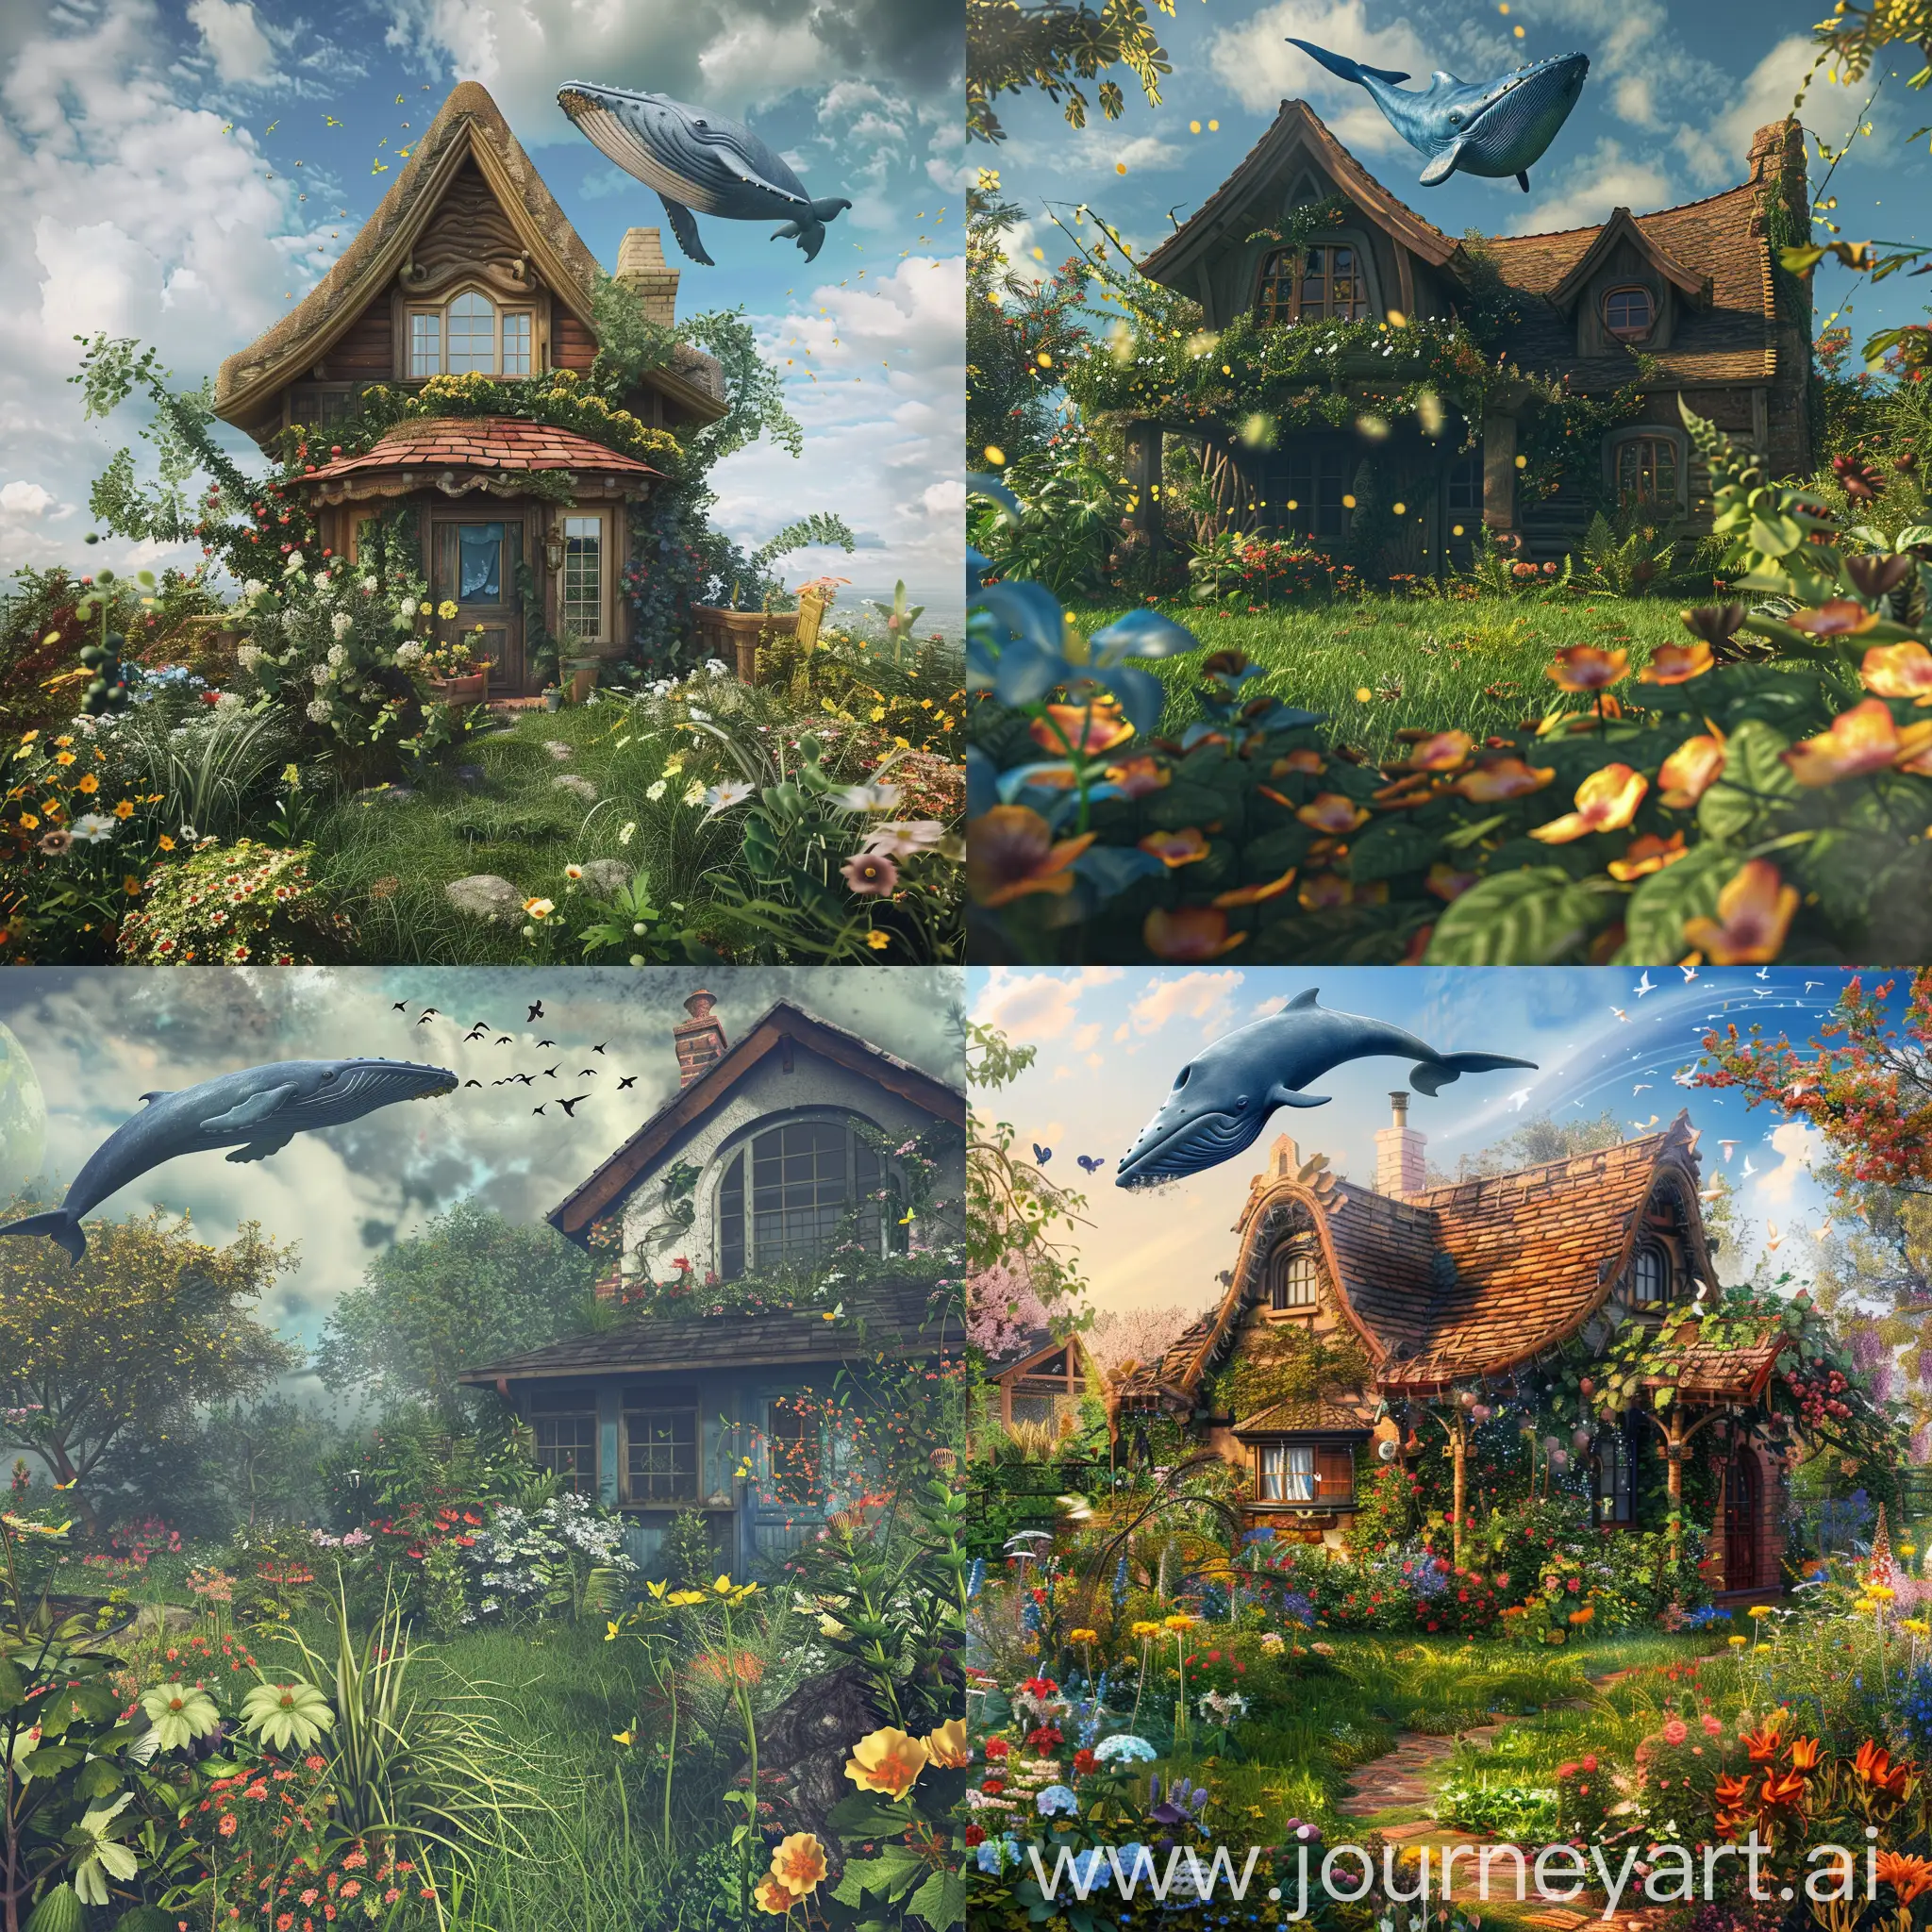 Whimsical-Cottage-with-Flying-Blue-Whale-amidst-Lush-Flora